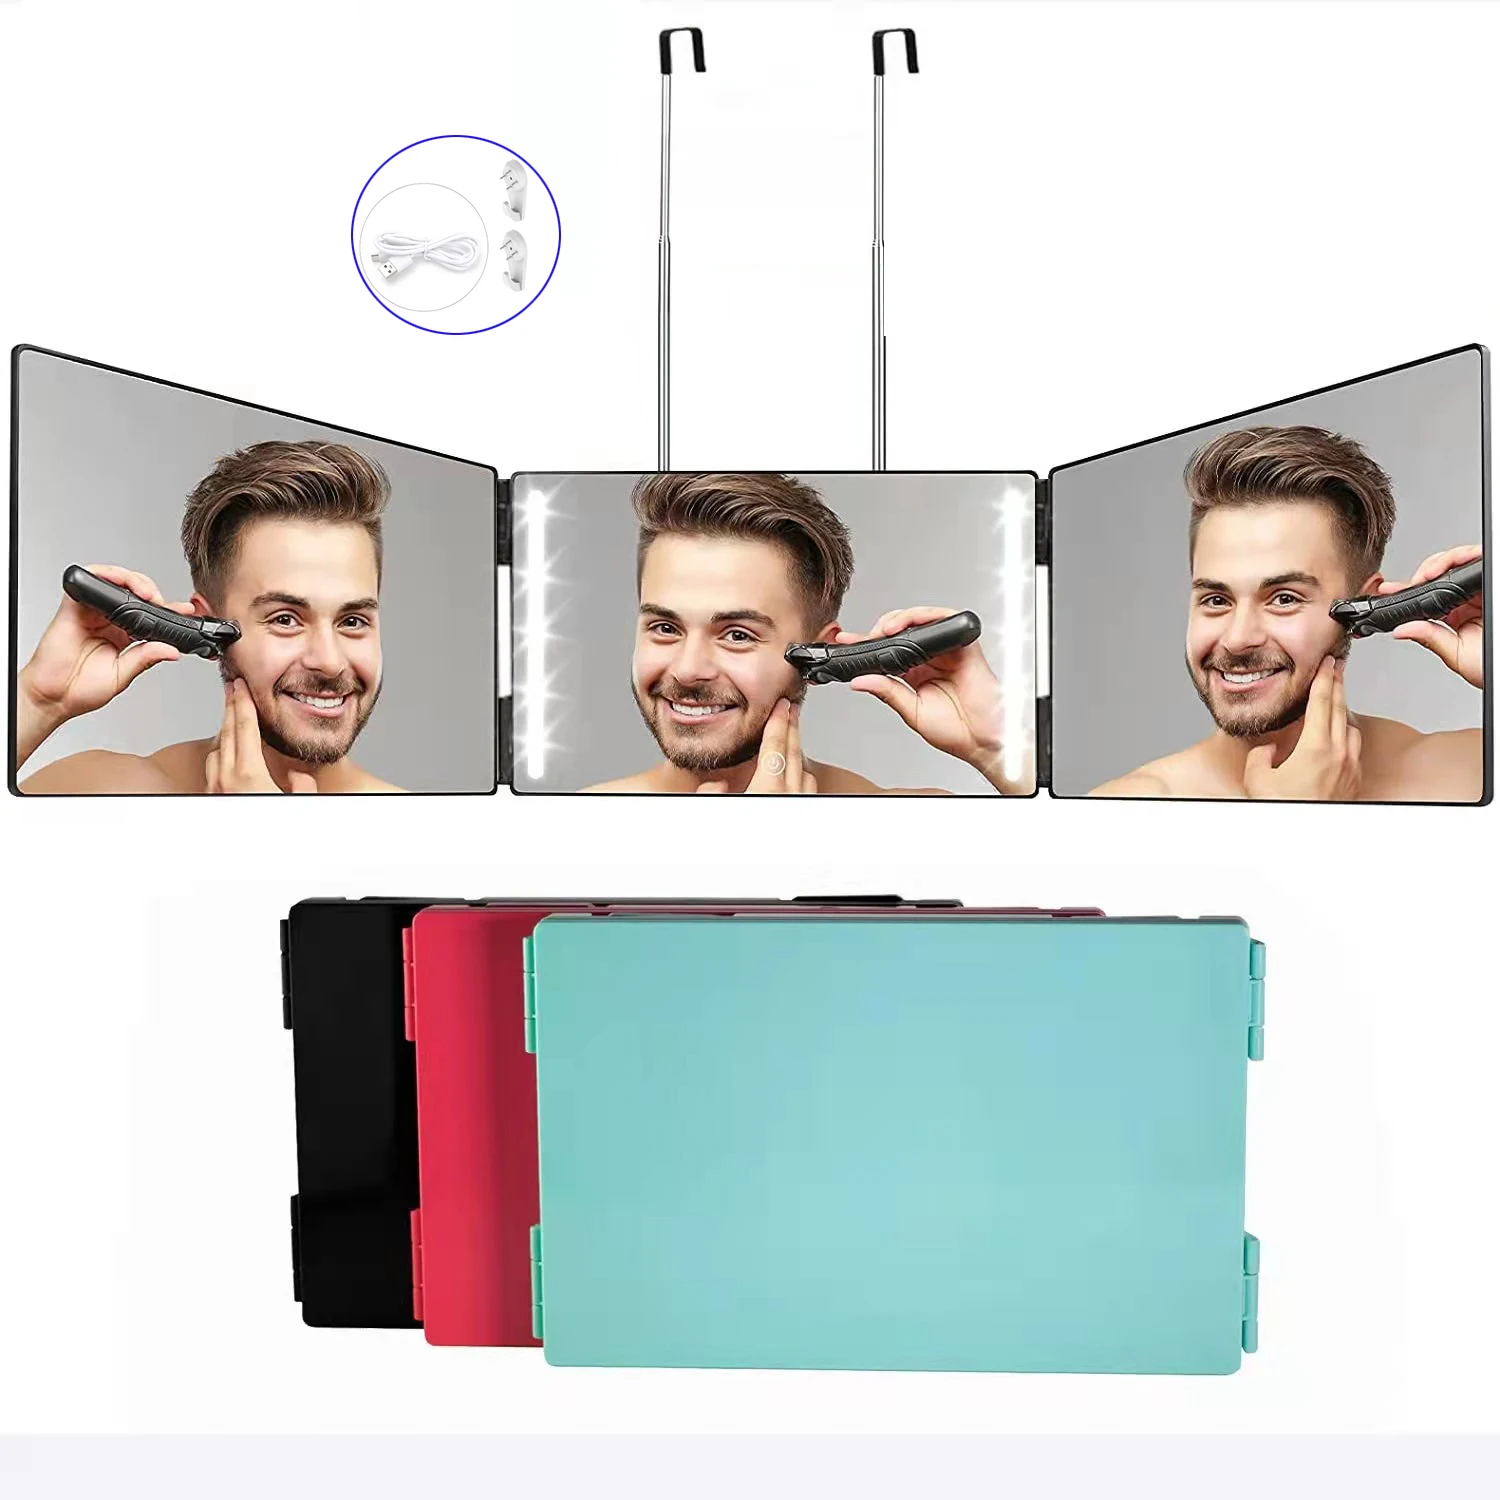 3 Way Mirror With Led For Self Hair Cutting, Styling & Make Up - Trifold 360  Mirror With Height Adjustable Telescoping Hooks - Makeup Mirrors -  AliExpress